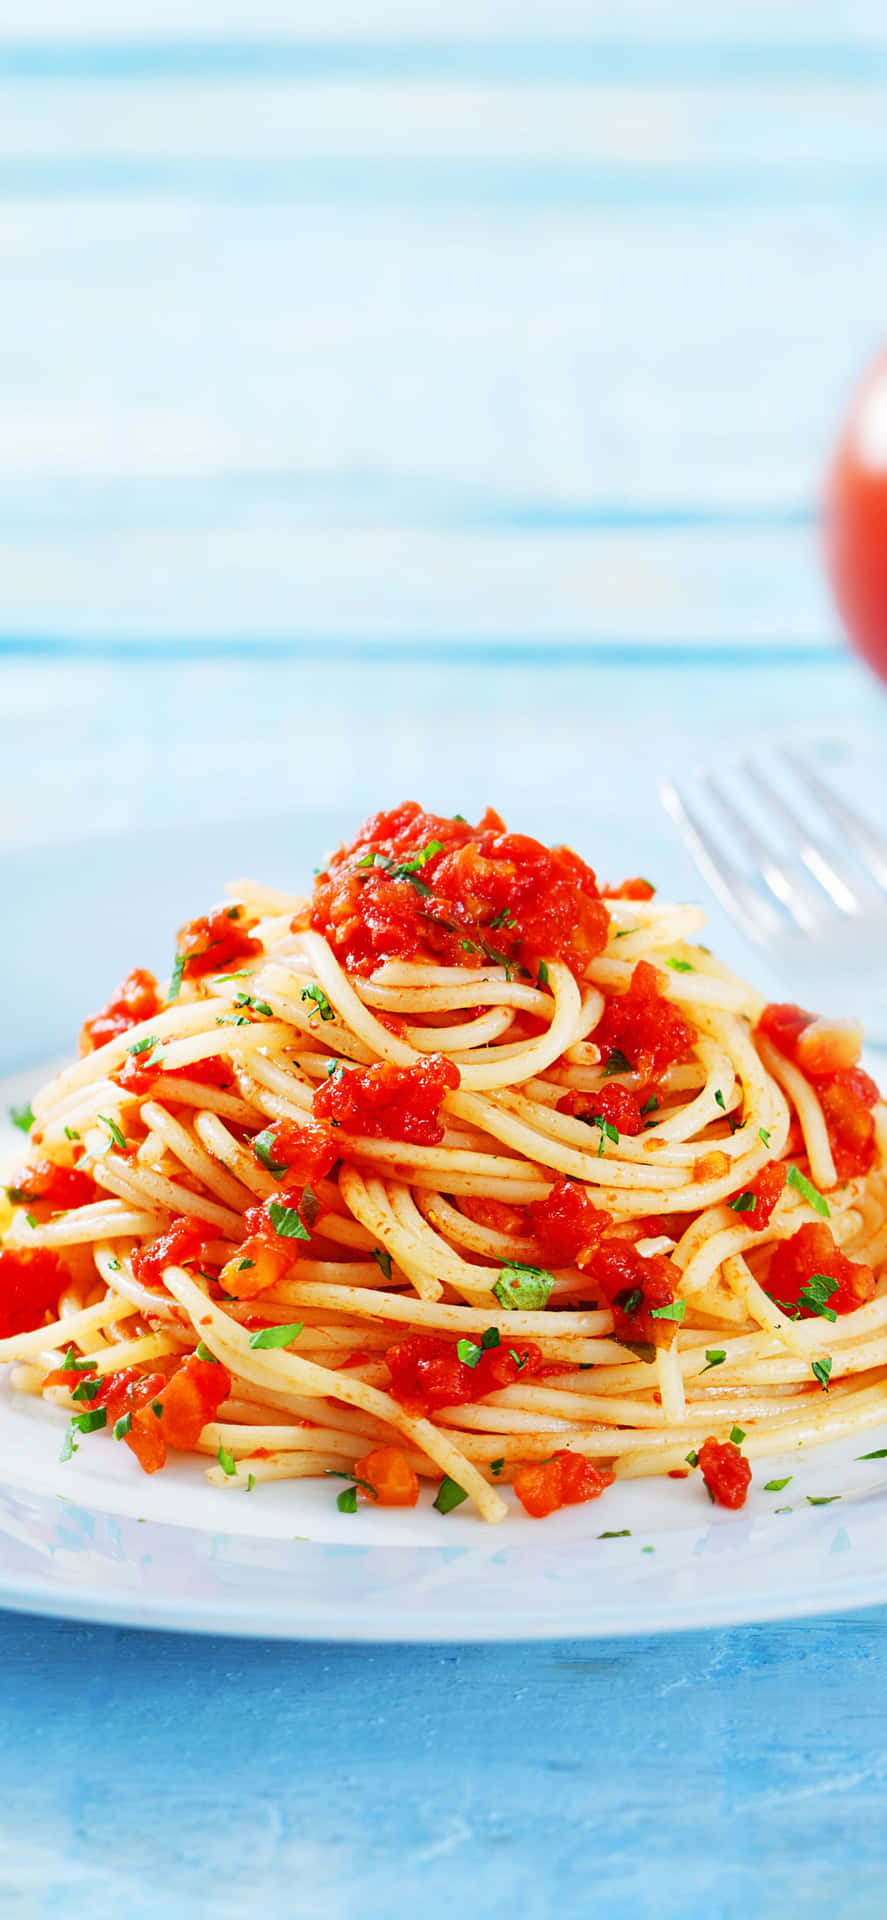 Spaghetti With Pieces Of Tomatoes iPhone X Pasta Background